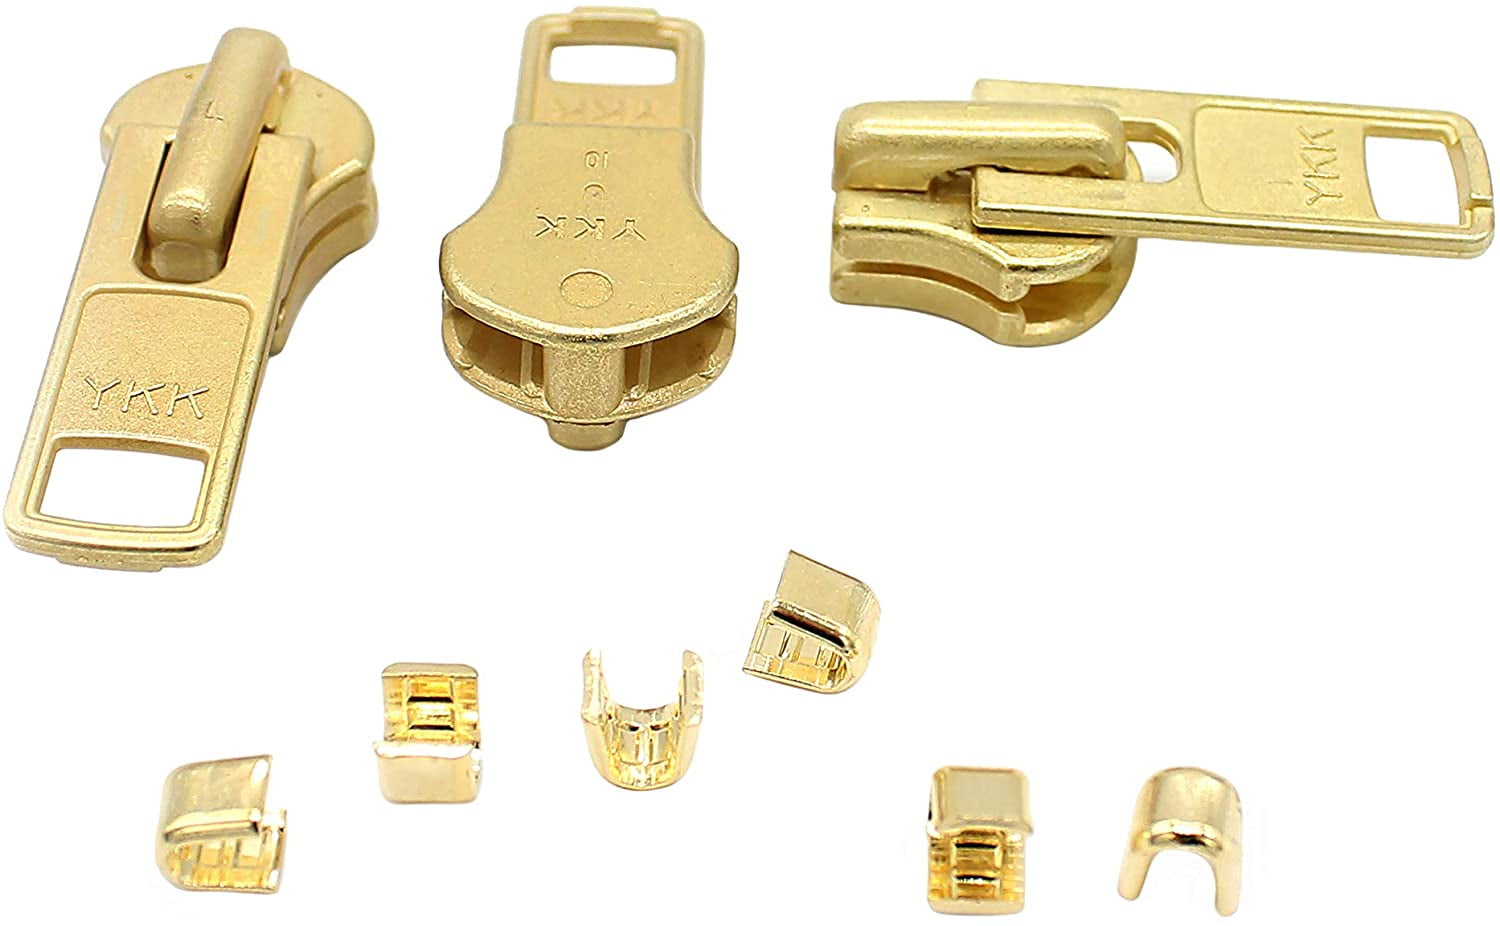 Zipper Repair Kit - #10 Heavy Duty YKK Antique Brass Jacket Zipper Sliders  with Top Stops Included - Choose Your Quantity - Made in The United States